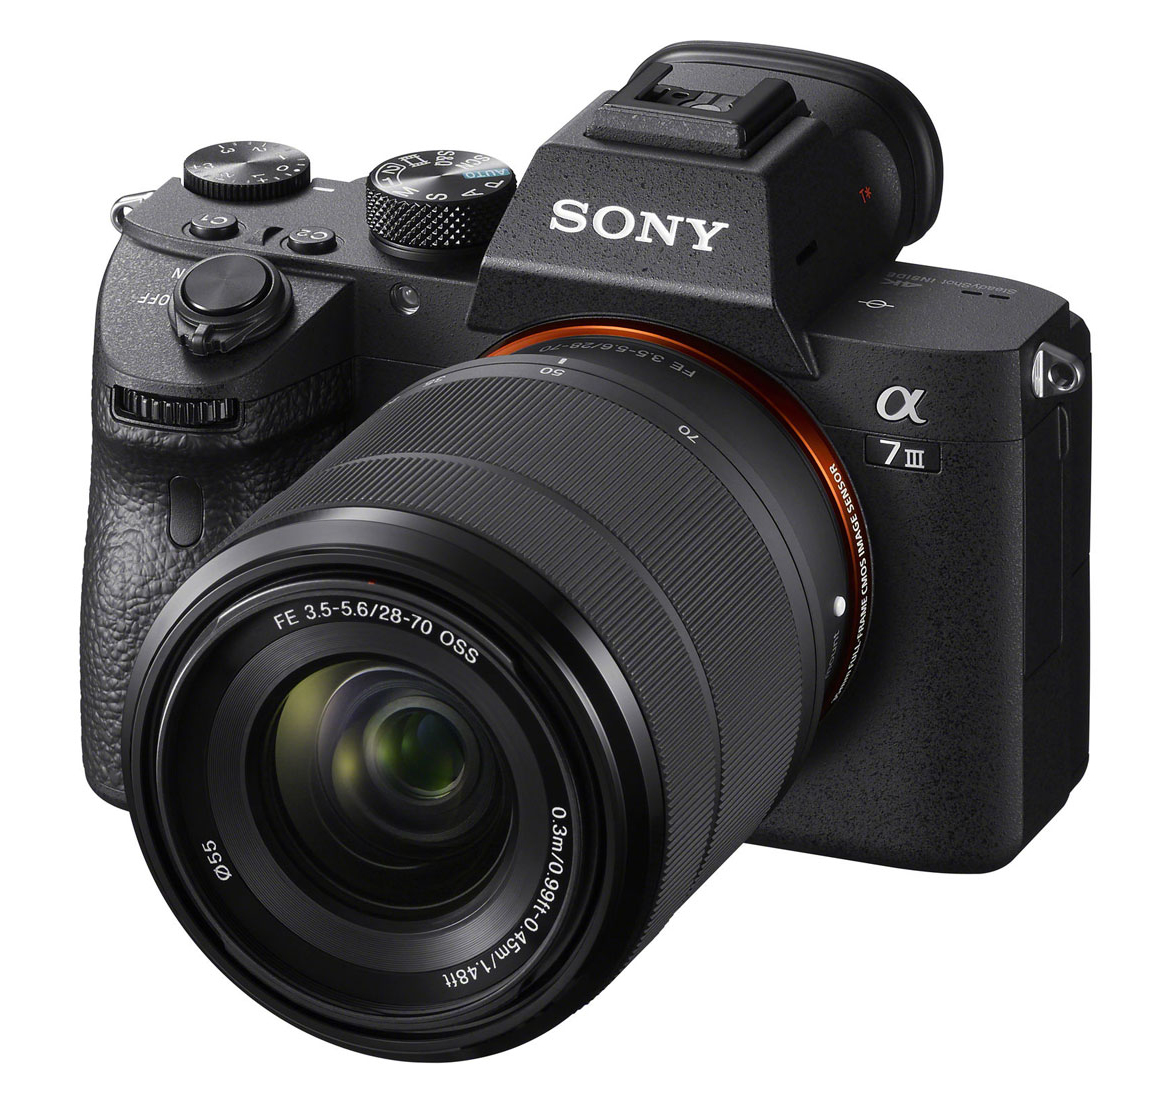 Sony Alpha a7 III 28-70mm Kit 24.2MP Full Frame Mirrorless Camera with FE  28-70 mm F3.5-5.6 OSS Lens | Full Compass Systems